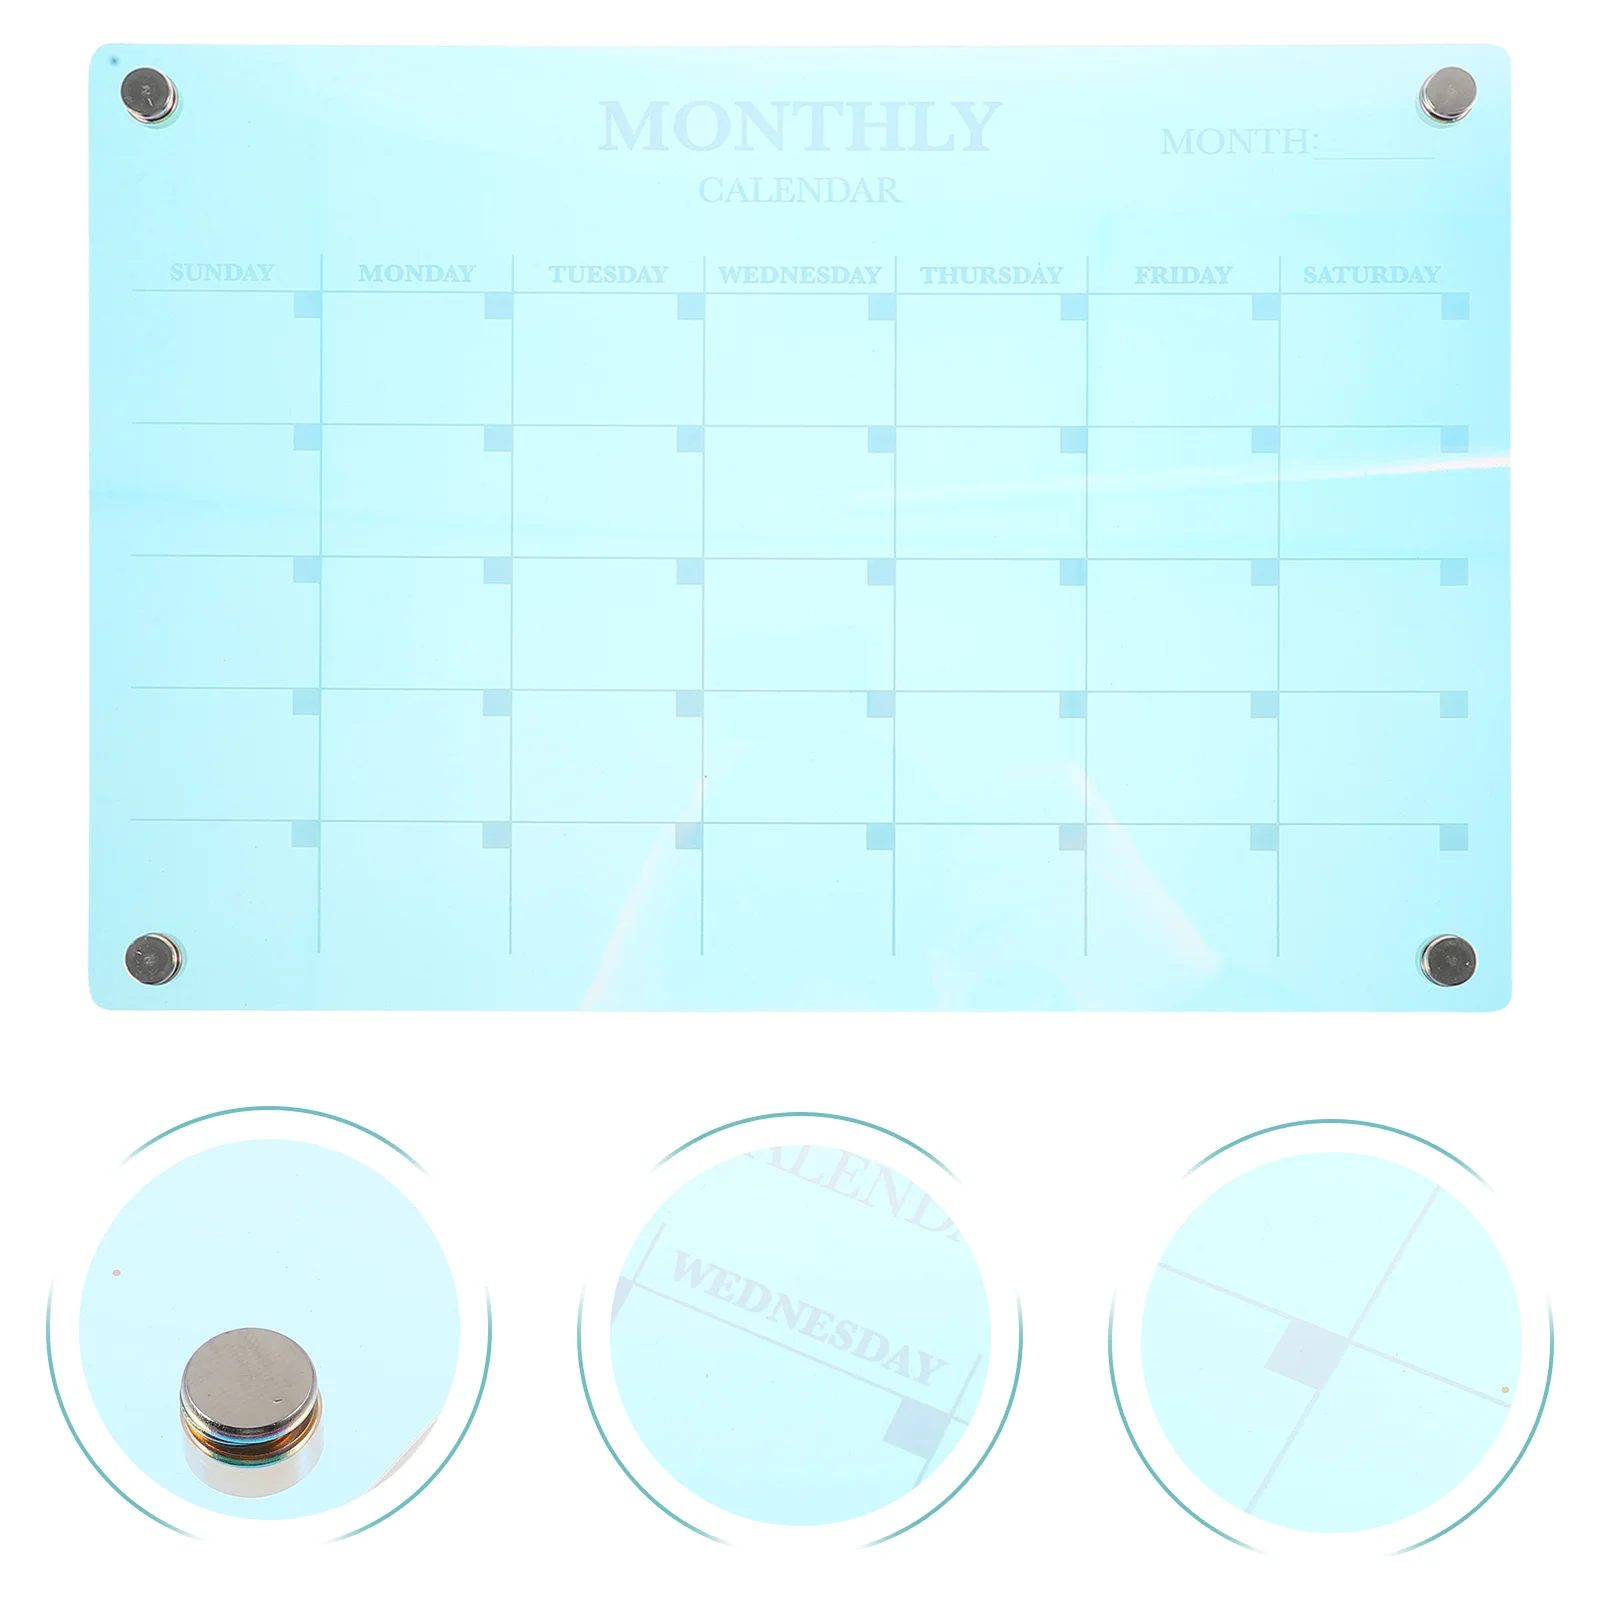 Acrylic Planner Board Monthly Planner Calendar To Do List Board for Kitchen Planning Magnetic Planner Board Memo Grocery List 6pcs magnetic notepads grocery list shopping list notepads with magnet fridge memo notepads